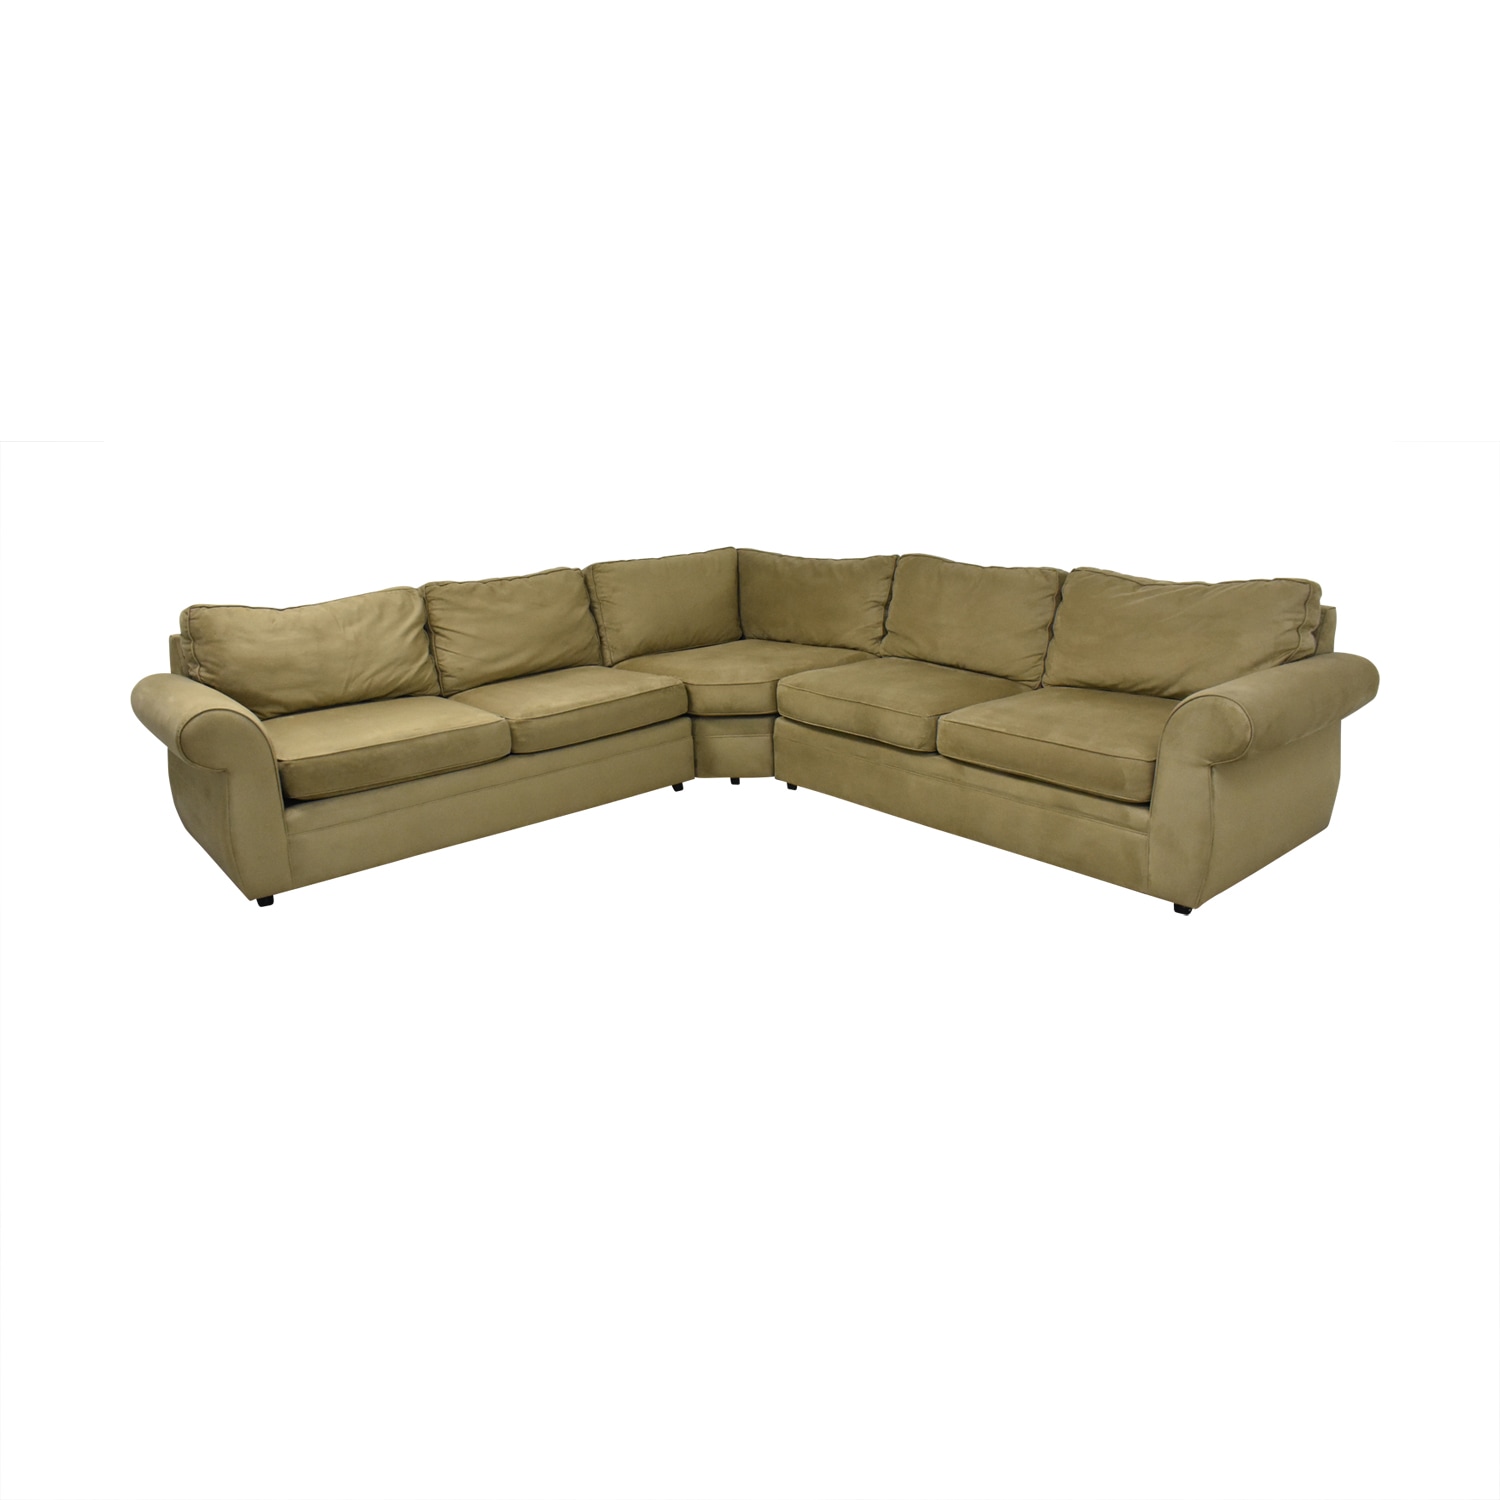 buy Pottery Barn Pearce Roll Arm L Shaped Sectional Sofa Pottery Barn Sectionals